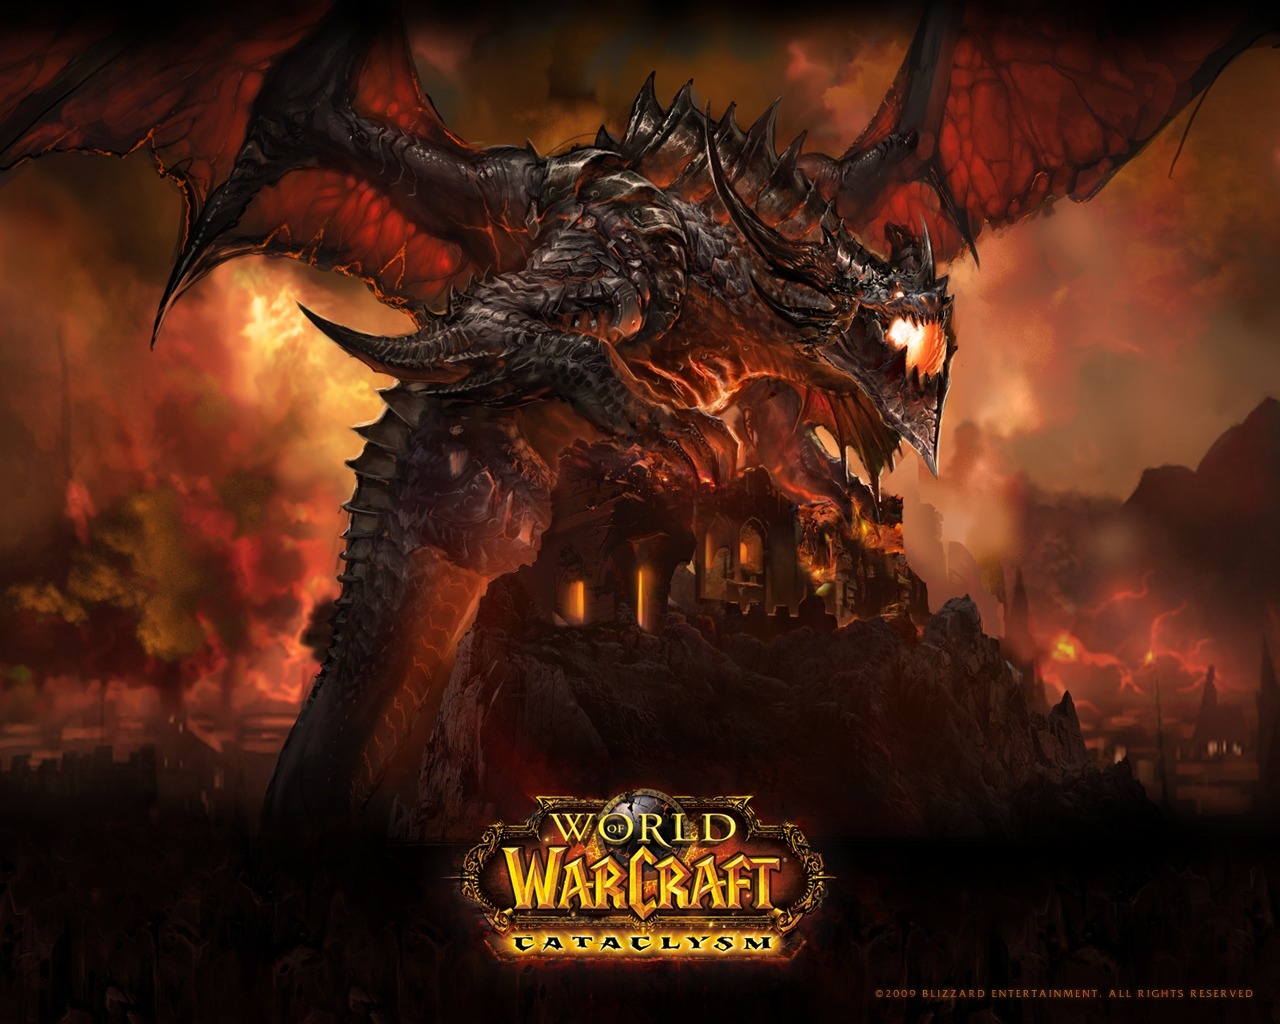 Deathwing WoW Cataclysm for 1280 x 1024 resolution